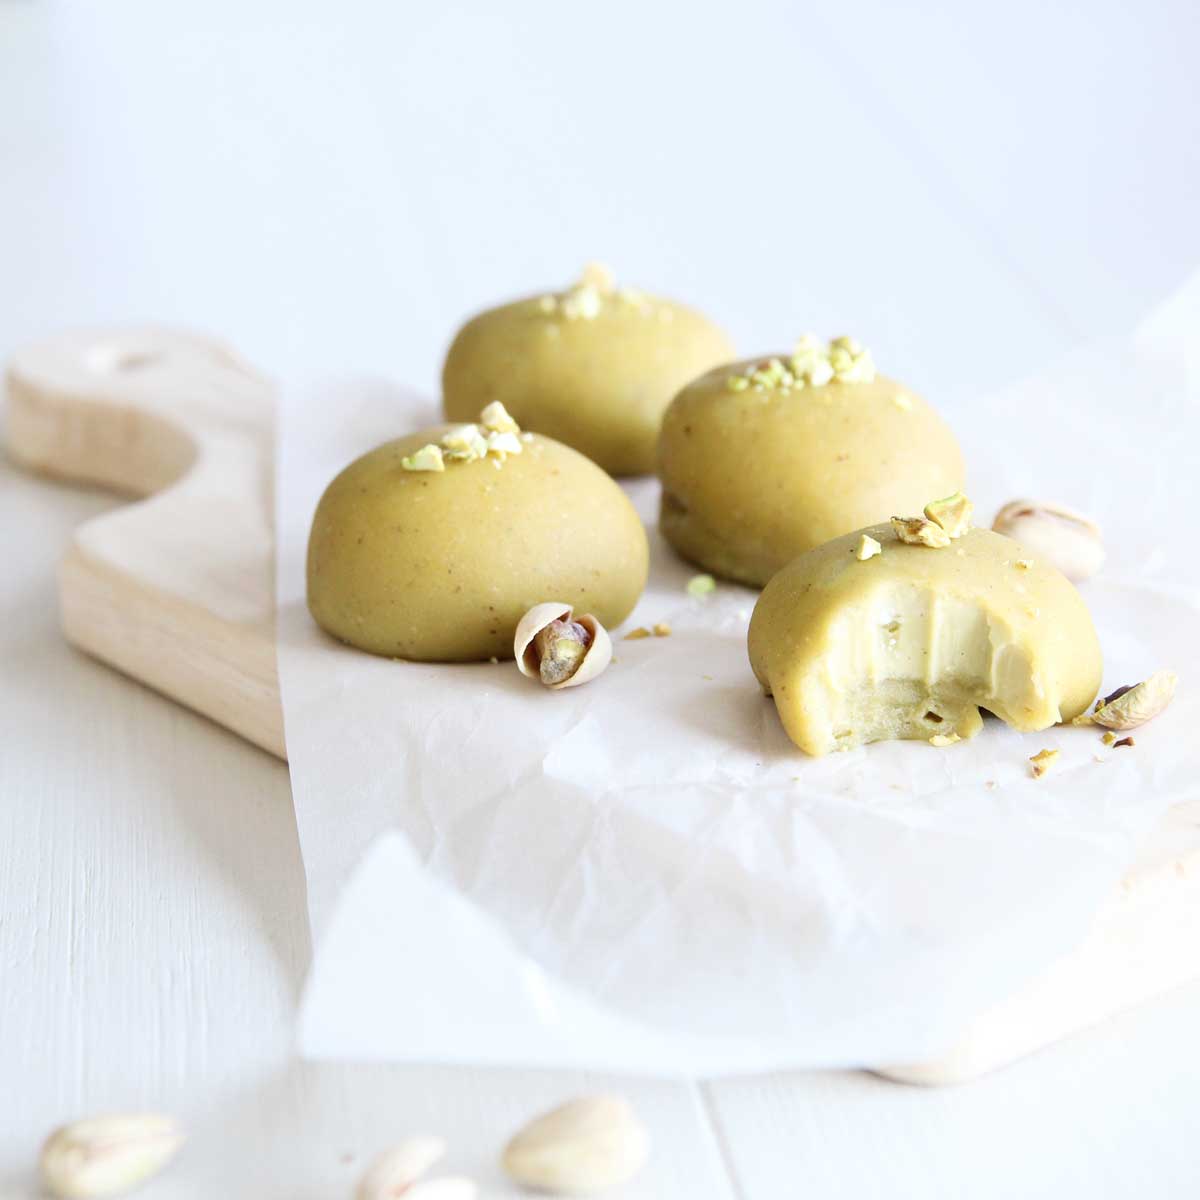 The Best Ever Pistachio Butter Mochi (Made with Mochiko Flour) - Walnut Butter Mooncakes